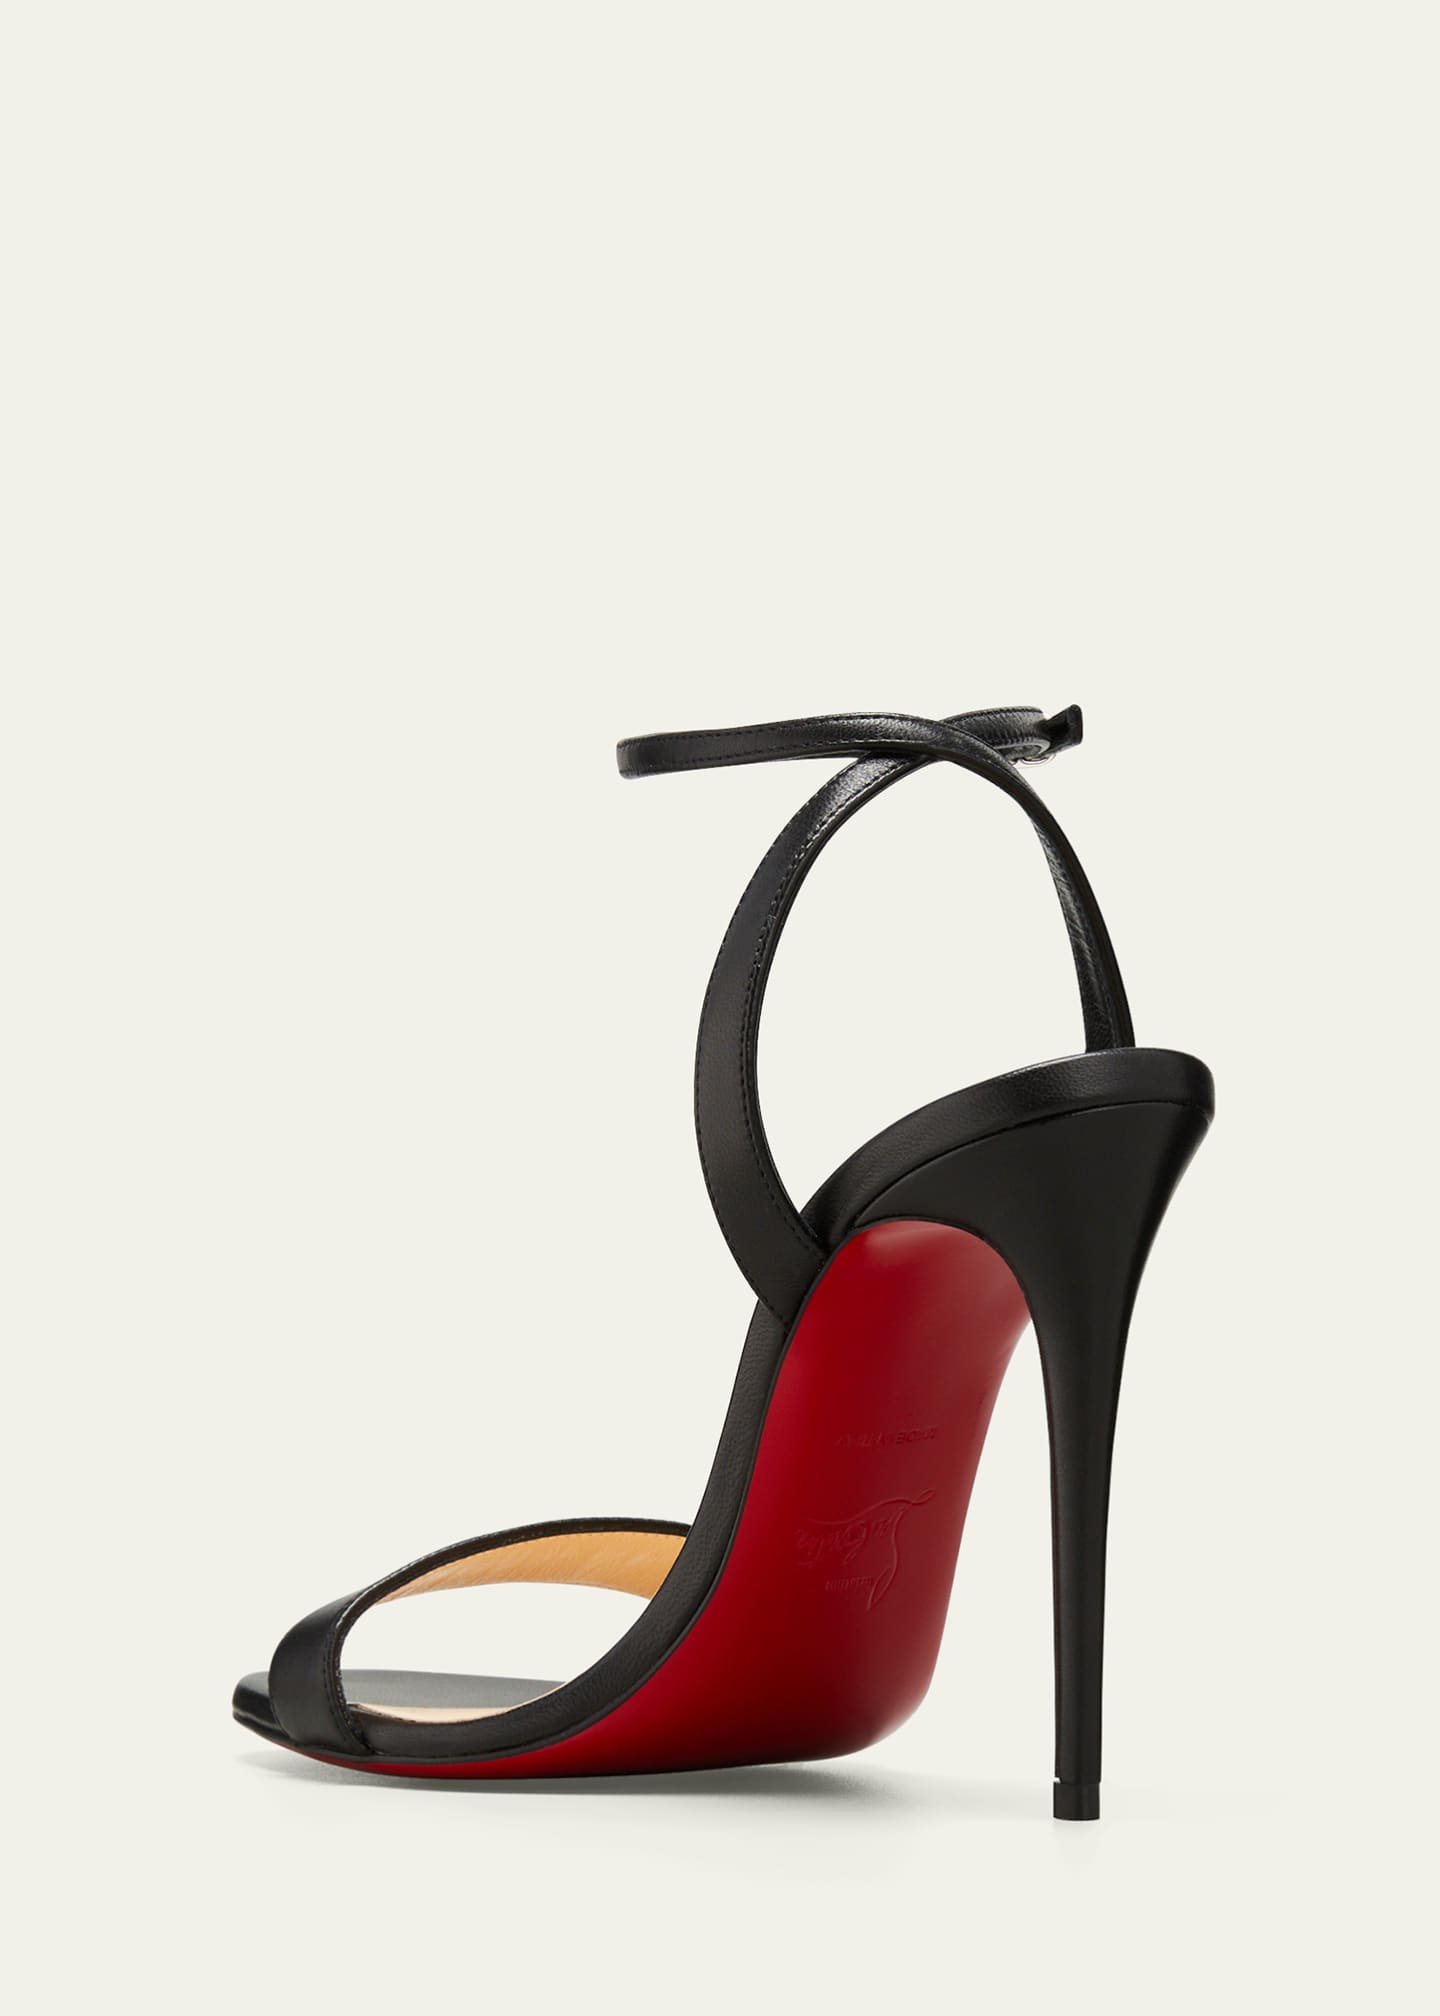 Christian Louboutin Loubigirl Ankle-Strap Red Sole Sandals Gummy